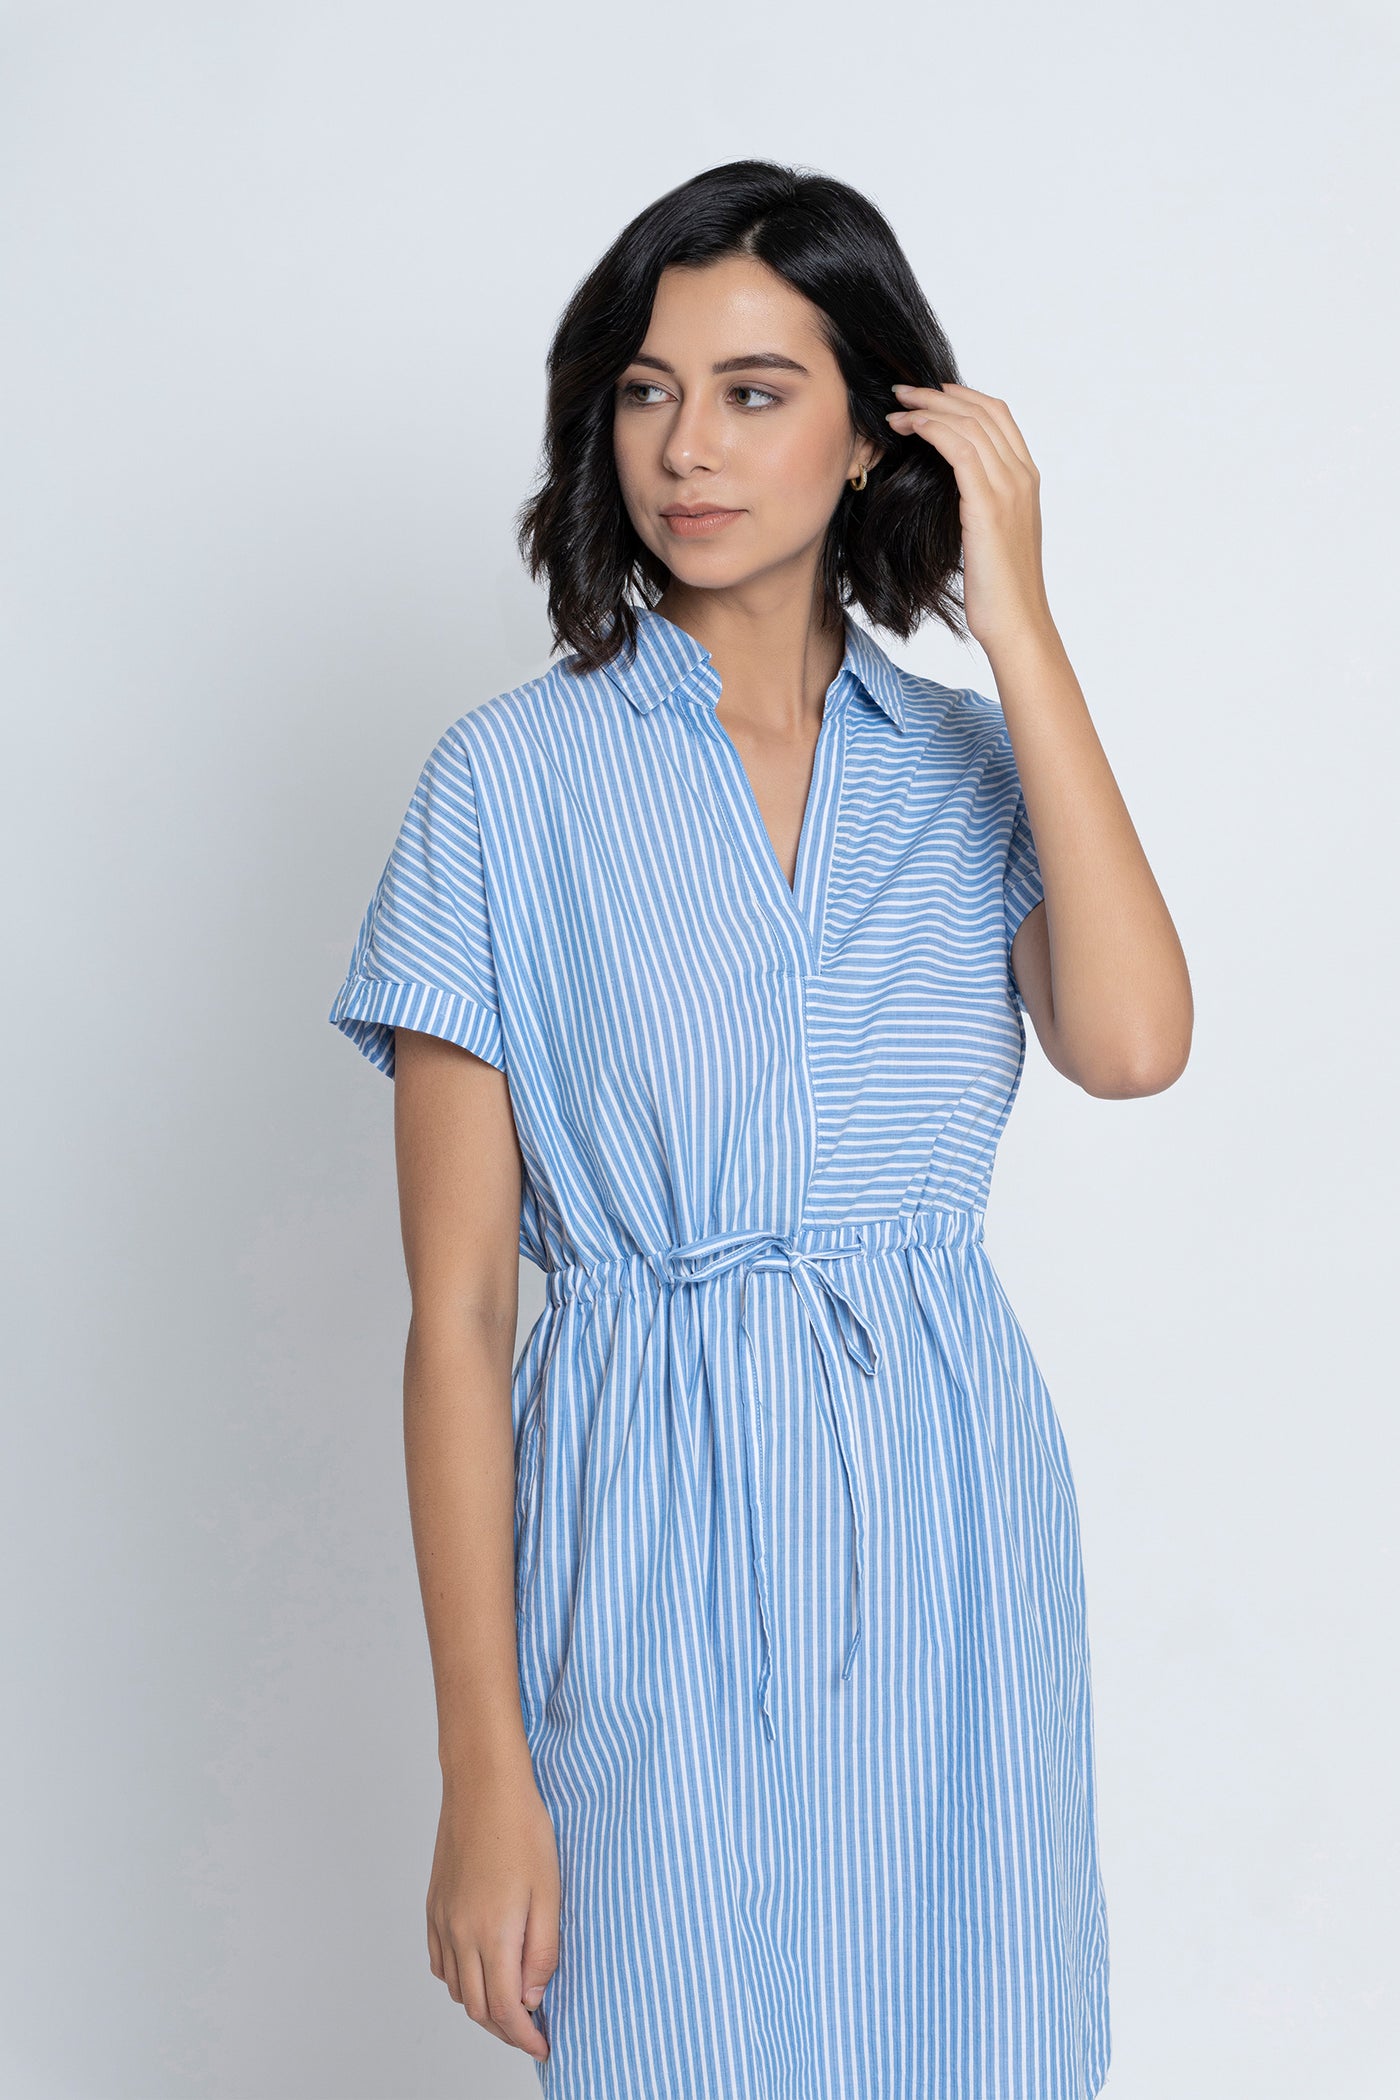 Blue and White Stripes Dress with loop belt